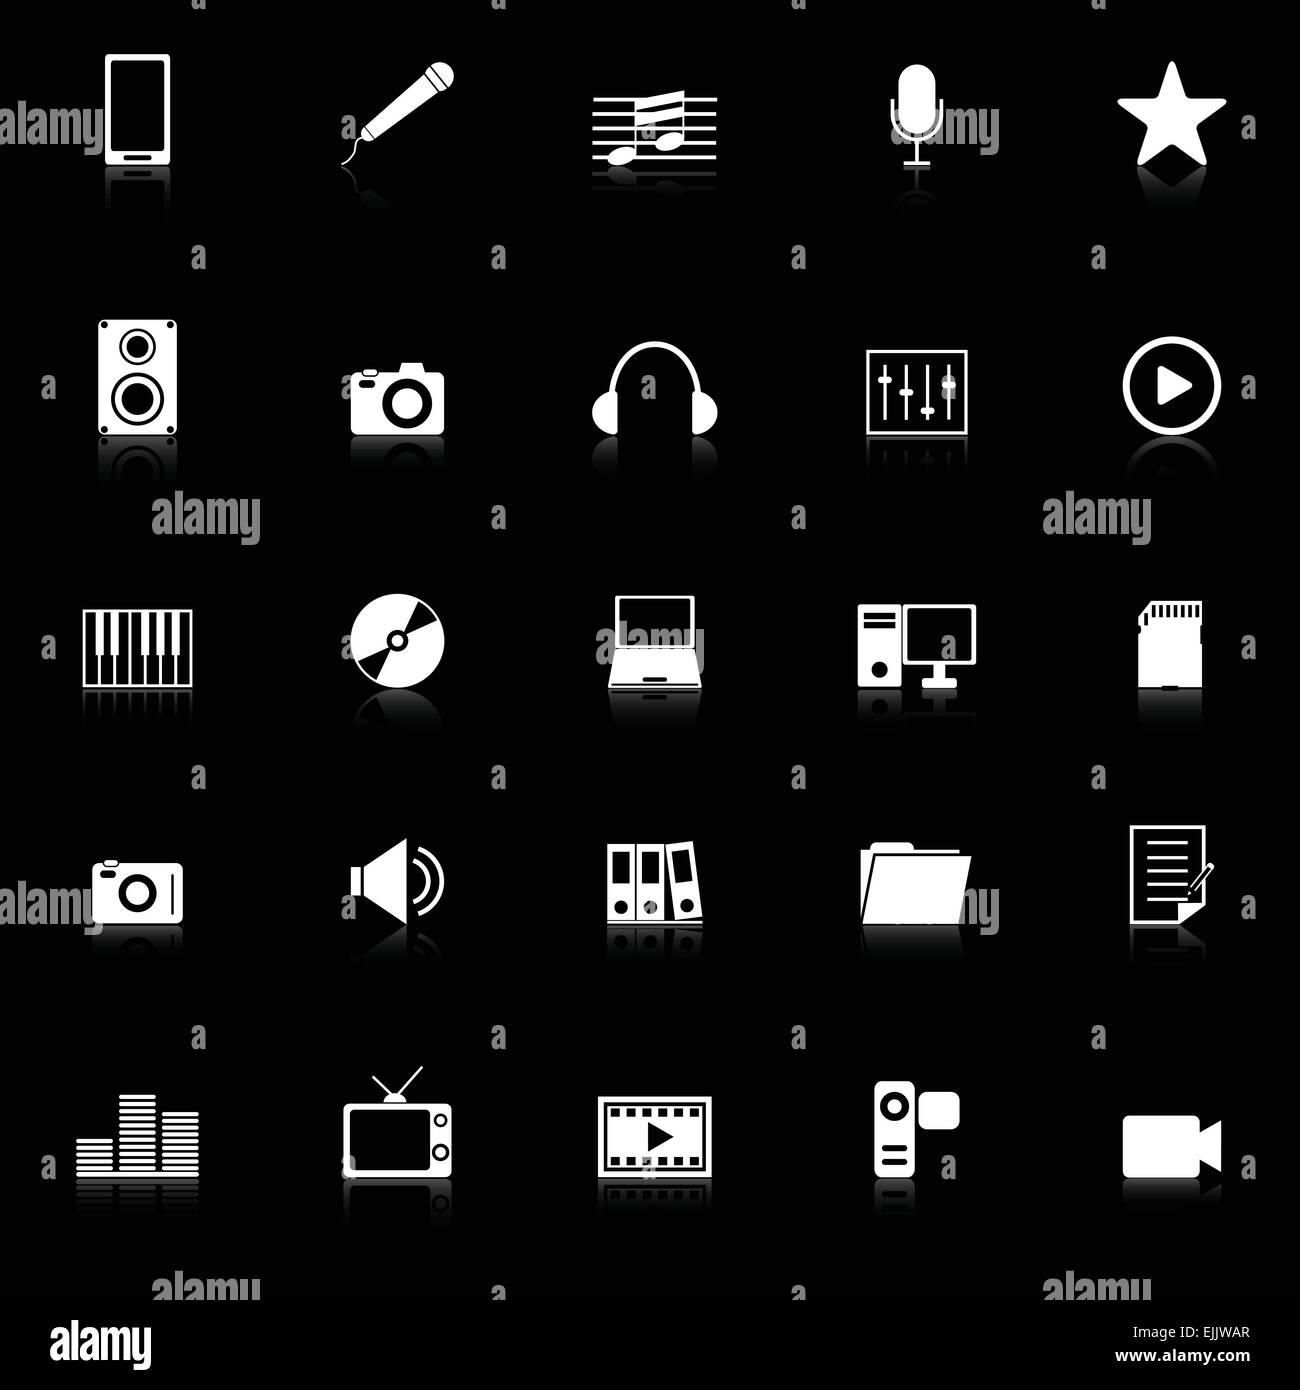 Media icons with reflect on black background, stock vector Stock Vector